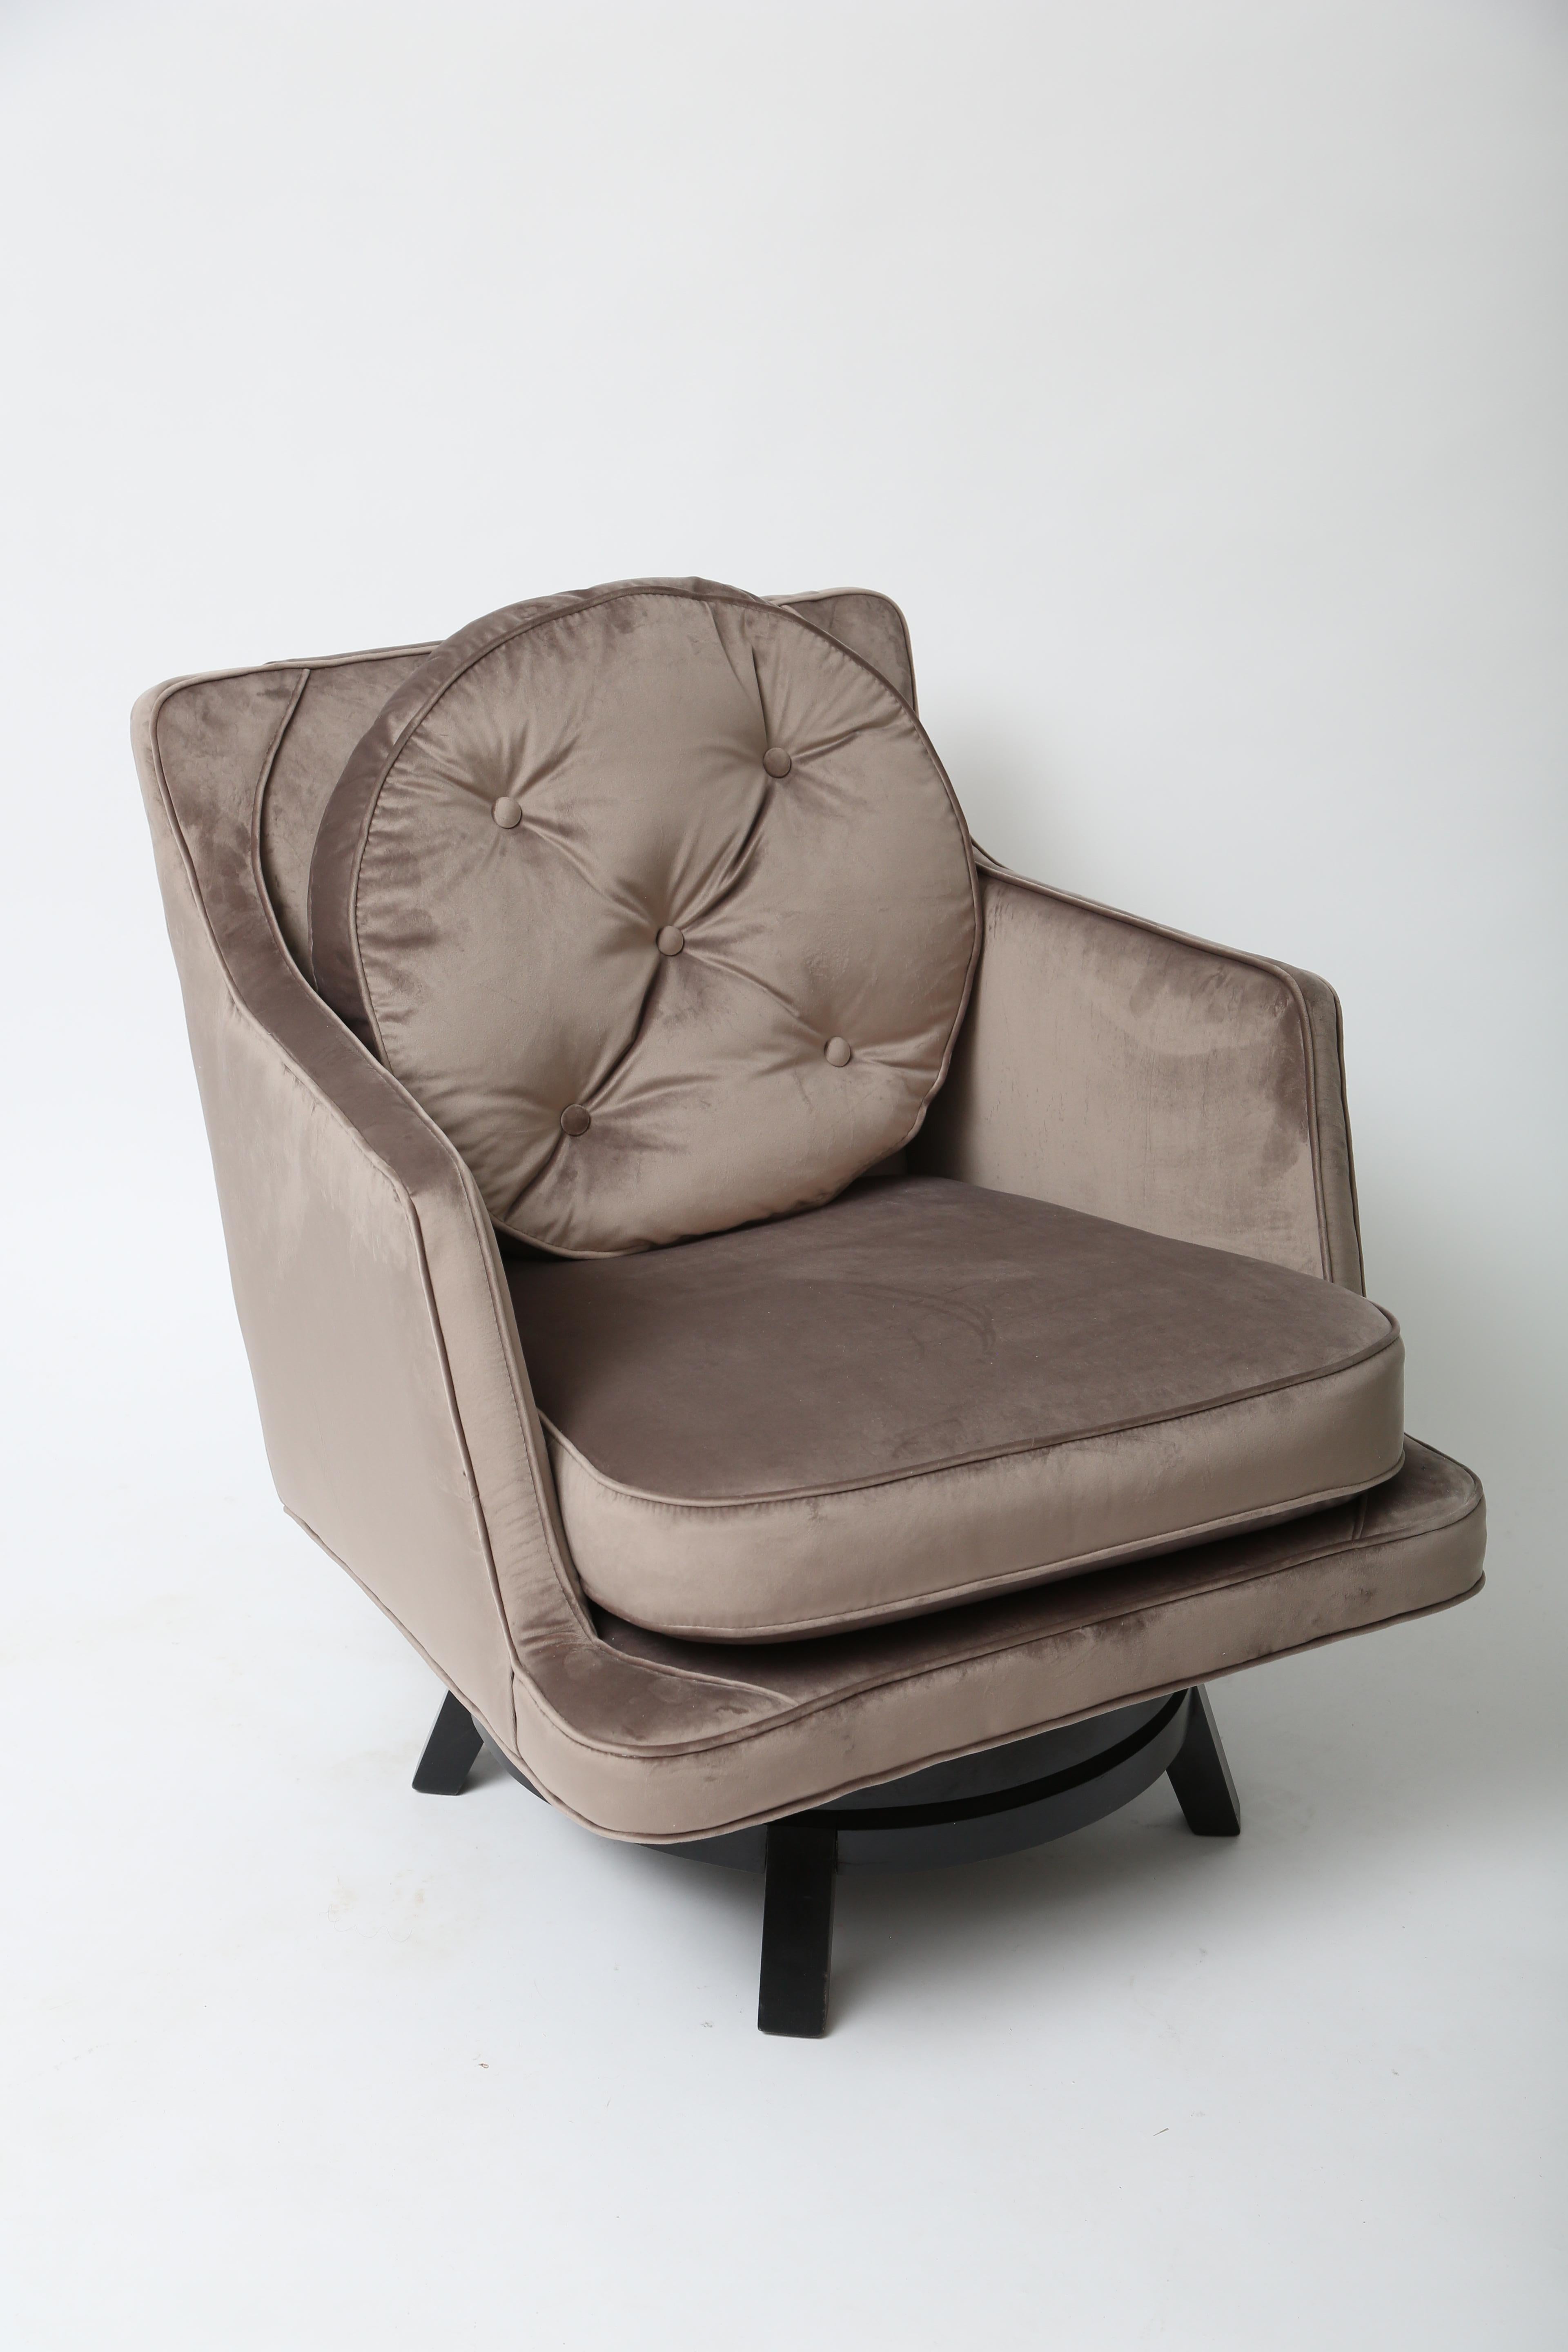 Edward Wormley for Dunbar Swivel Lounge Chairs In Good Condition For Sale In West Palm Beach, FL